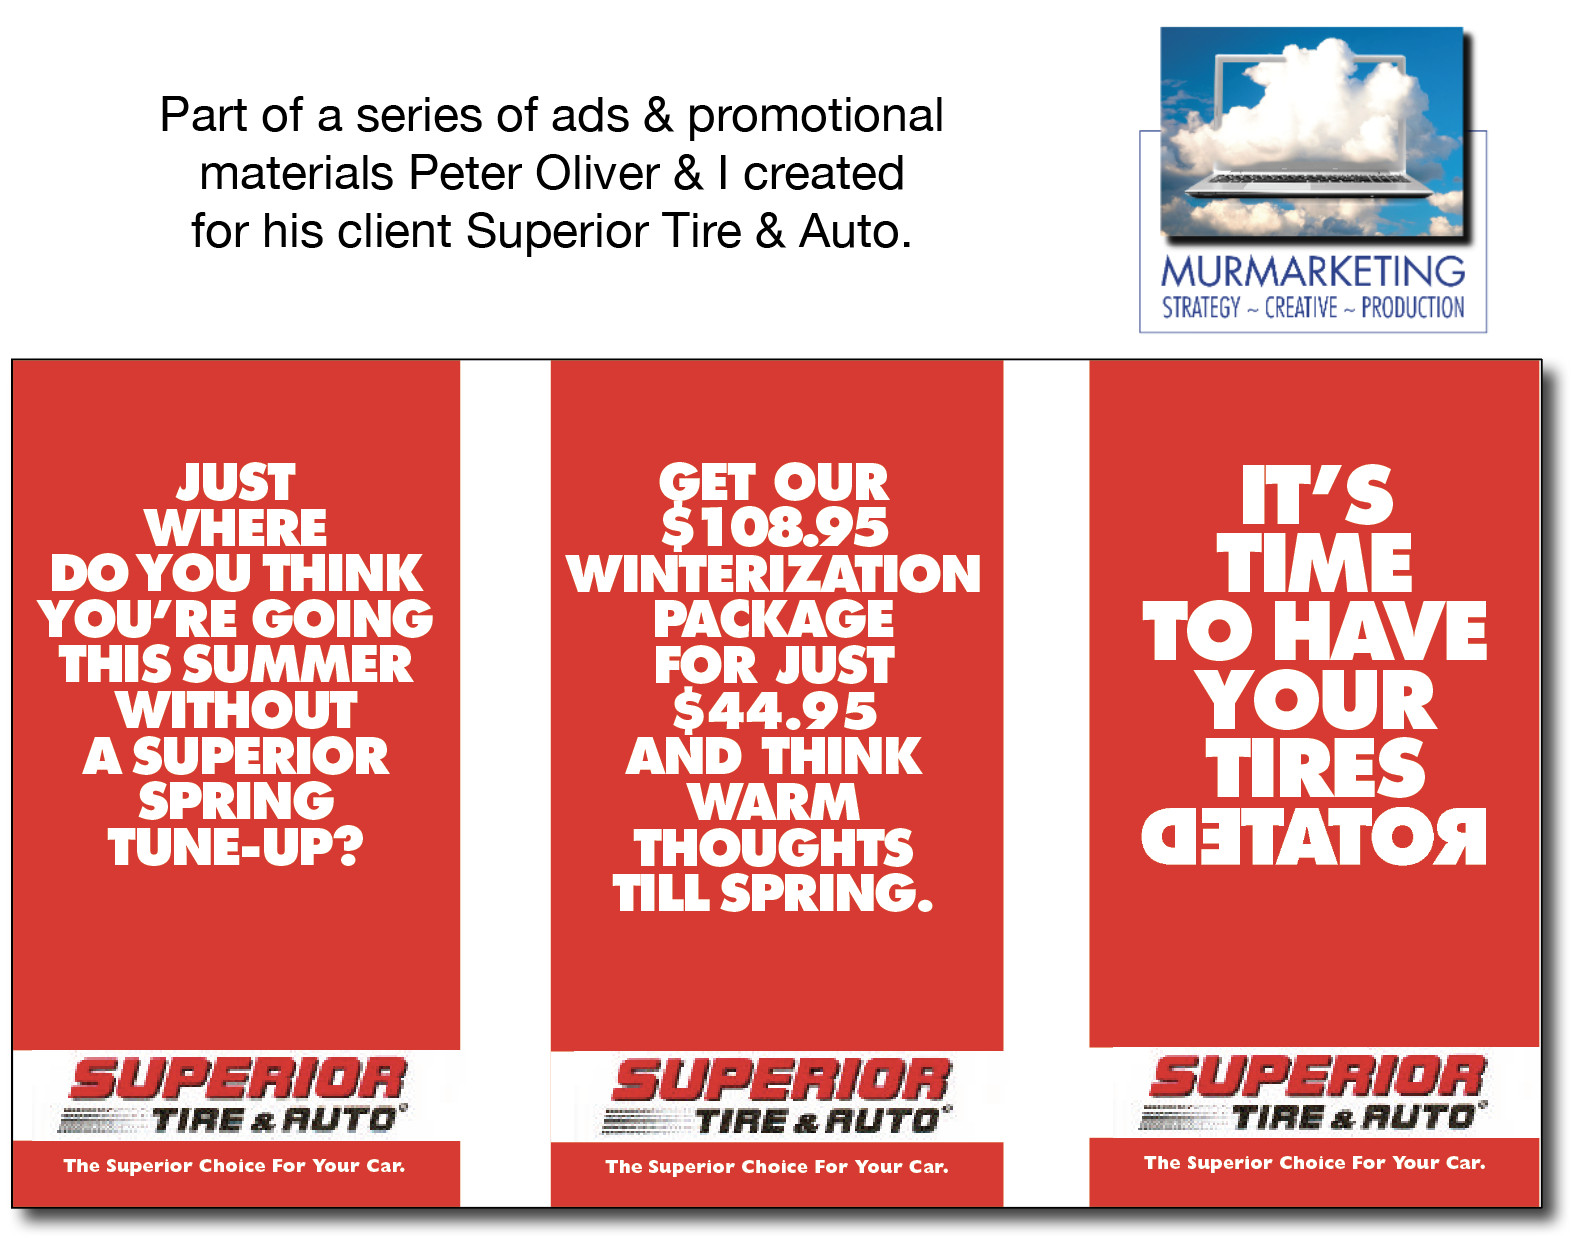 Part of a series of ads & promotional
materials Peter Oliver & | created
for his client Superior Tire & Auto.

 

MURMARKETING
STRATEGY - CREATIVE ~ PRODUCTION

1)
WHERE
DO YOU THINK
YOU'RE GOING
THIS SUMMER

TUNE-UP? br ((Epyiy Le)
TET

#= TIRE& AUTO’ = TIRE&2 AUTO" = TIRE&aRUTO’

The Superior Choice For Your Car. The Superior Choice For Your Car. The Superior Choice For Your Car.